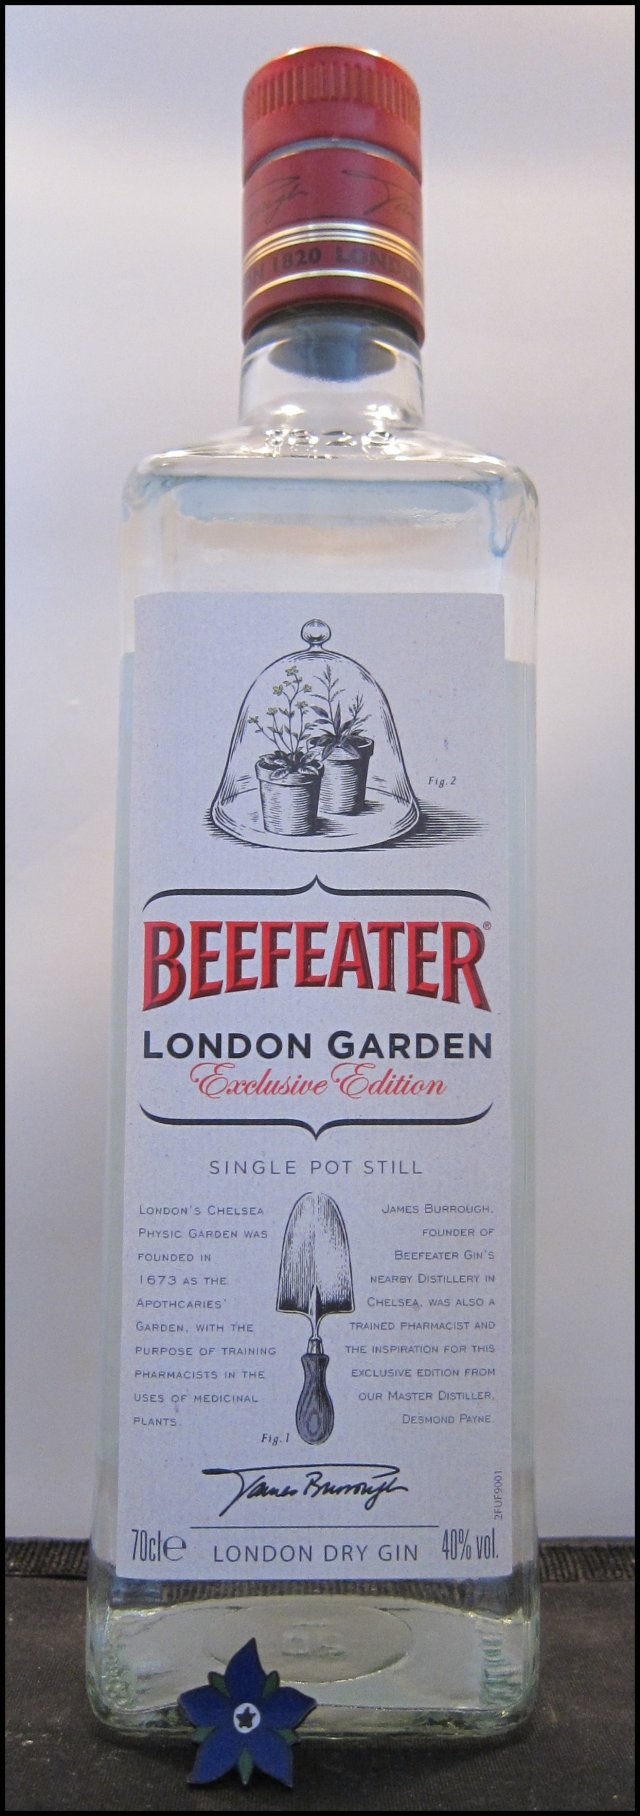 With with… Fruit | Gin Cocktails Beefeater Garden Bonus Summer Cup Beefeater – Gin! London